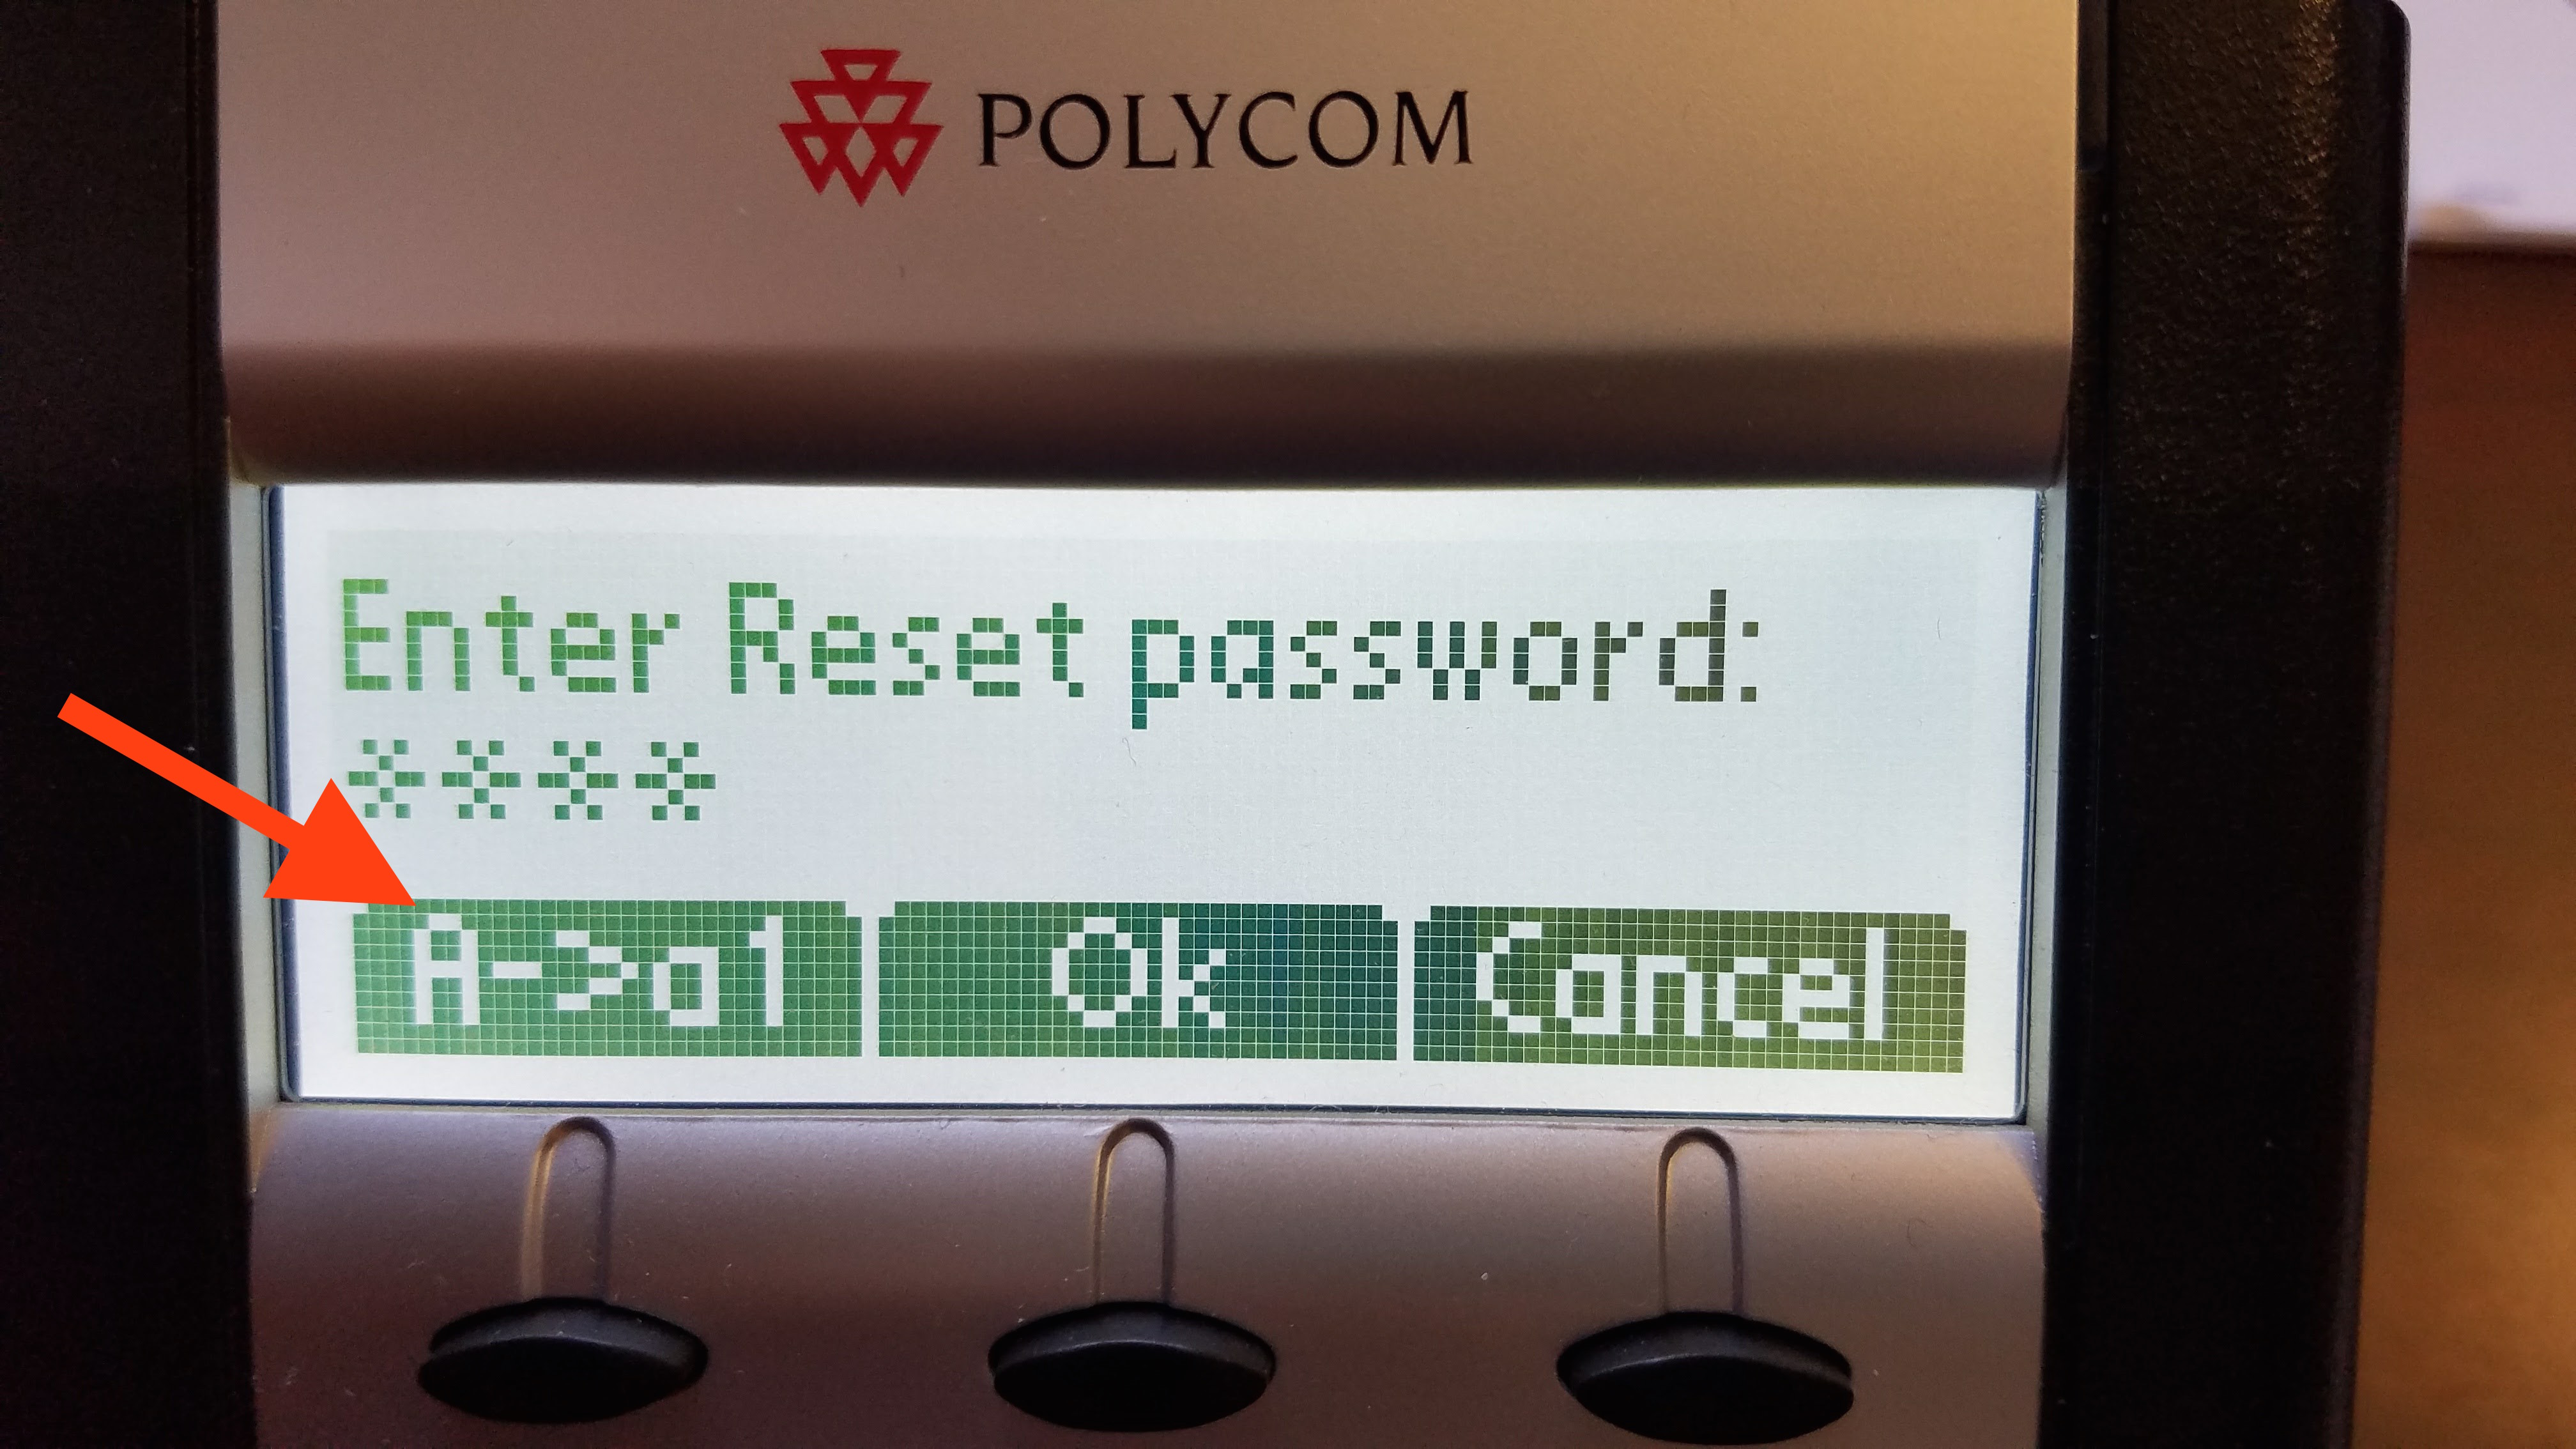 Polycom phone password reset switch between letters and numbers